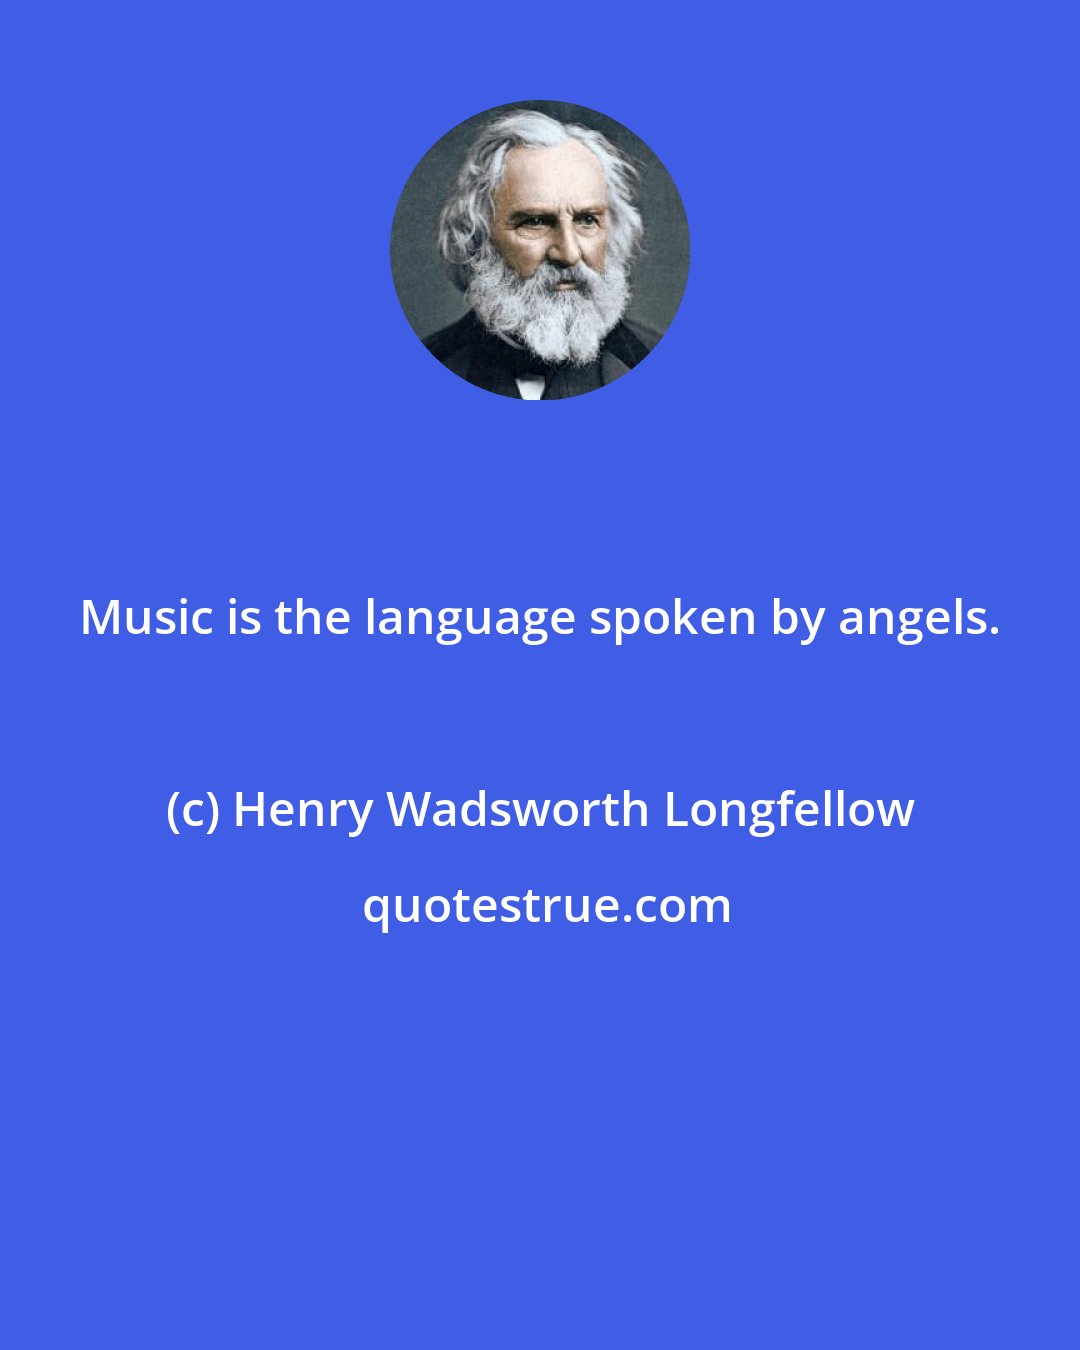 Henry Wadsworth Longfellow: Music is the language spoken by angels.